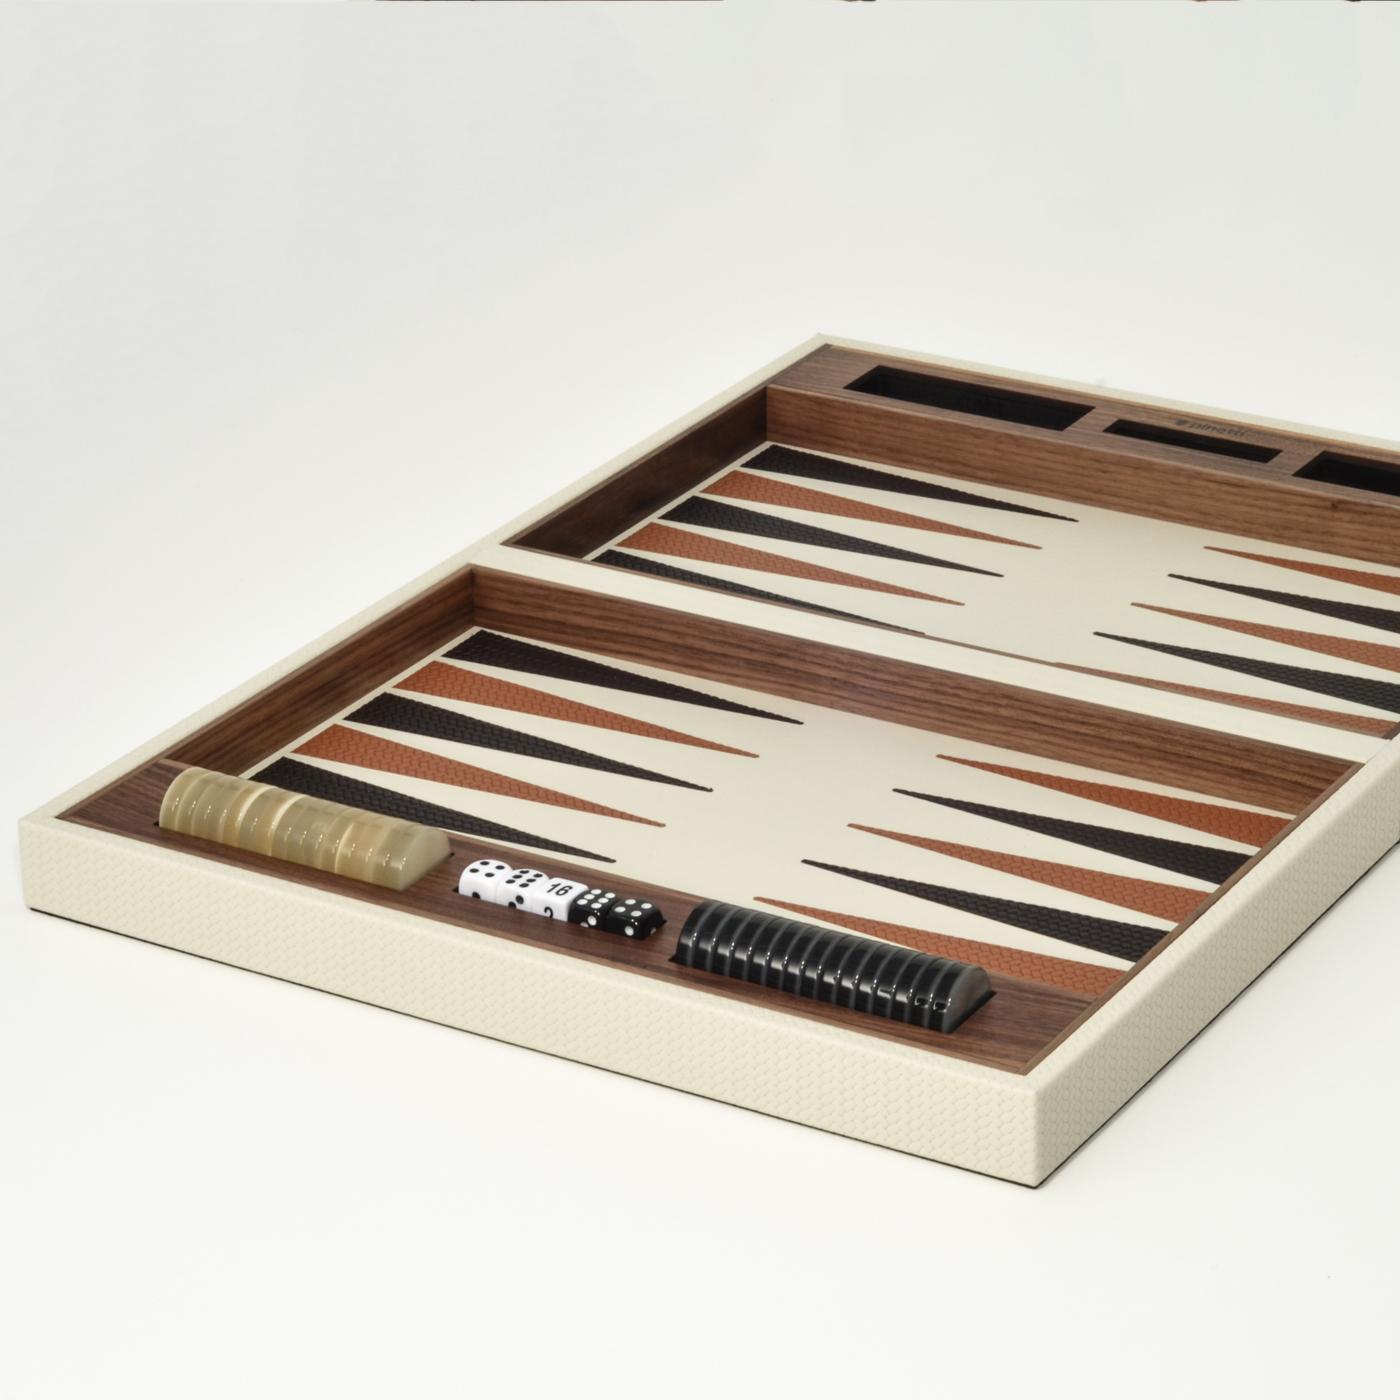 Dynamic and unpredictable, this backgammon boardgame set is a lavish accent piece for both modern and traditional interiors. The set box is crafted exclusively of Canaletto walnut, with the interior boasting a colorful design with black and